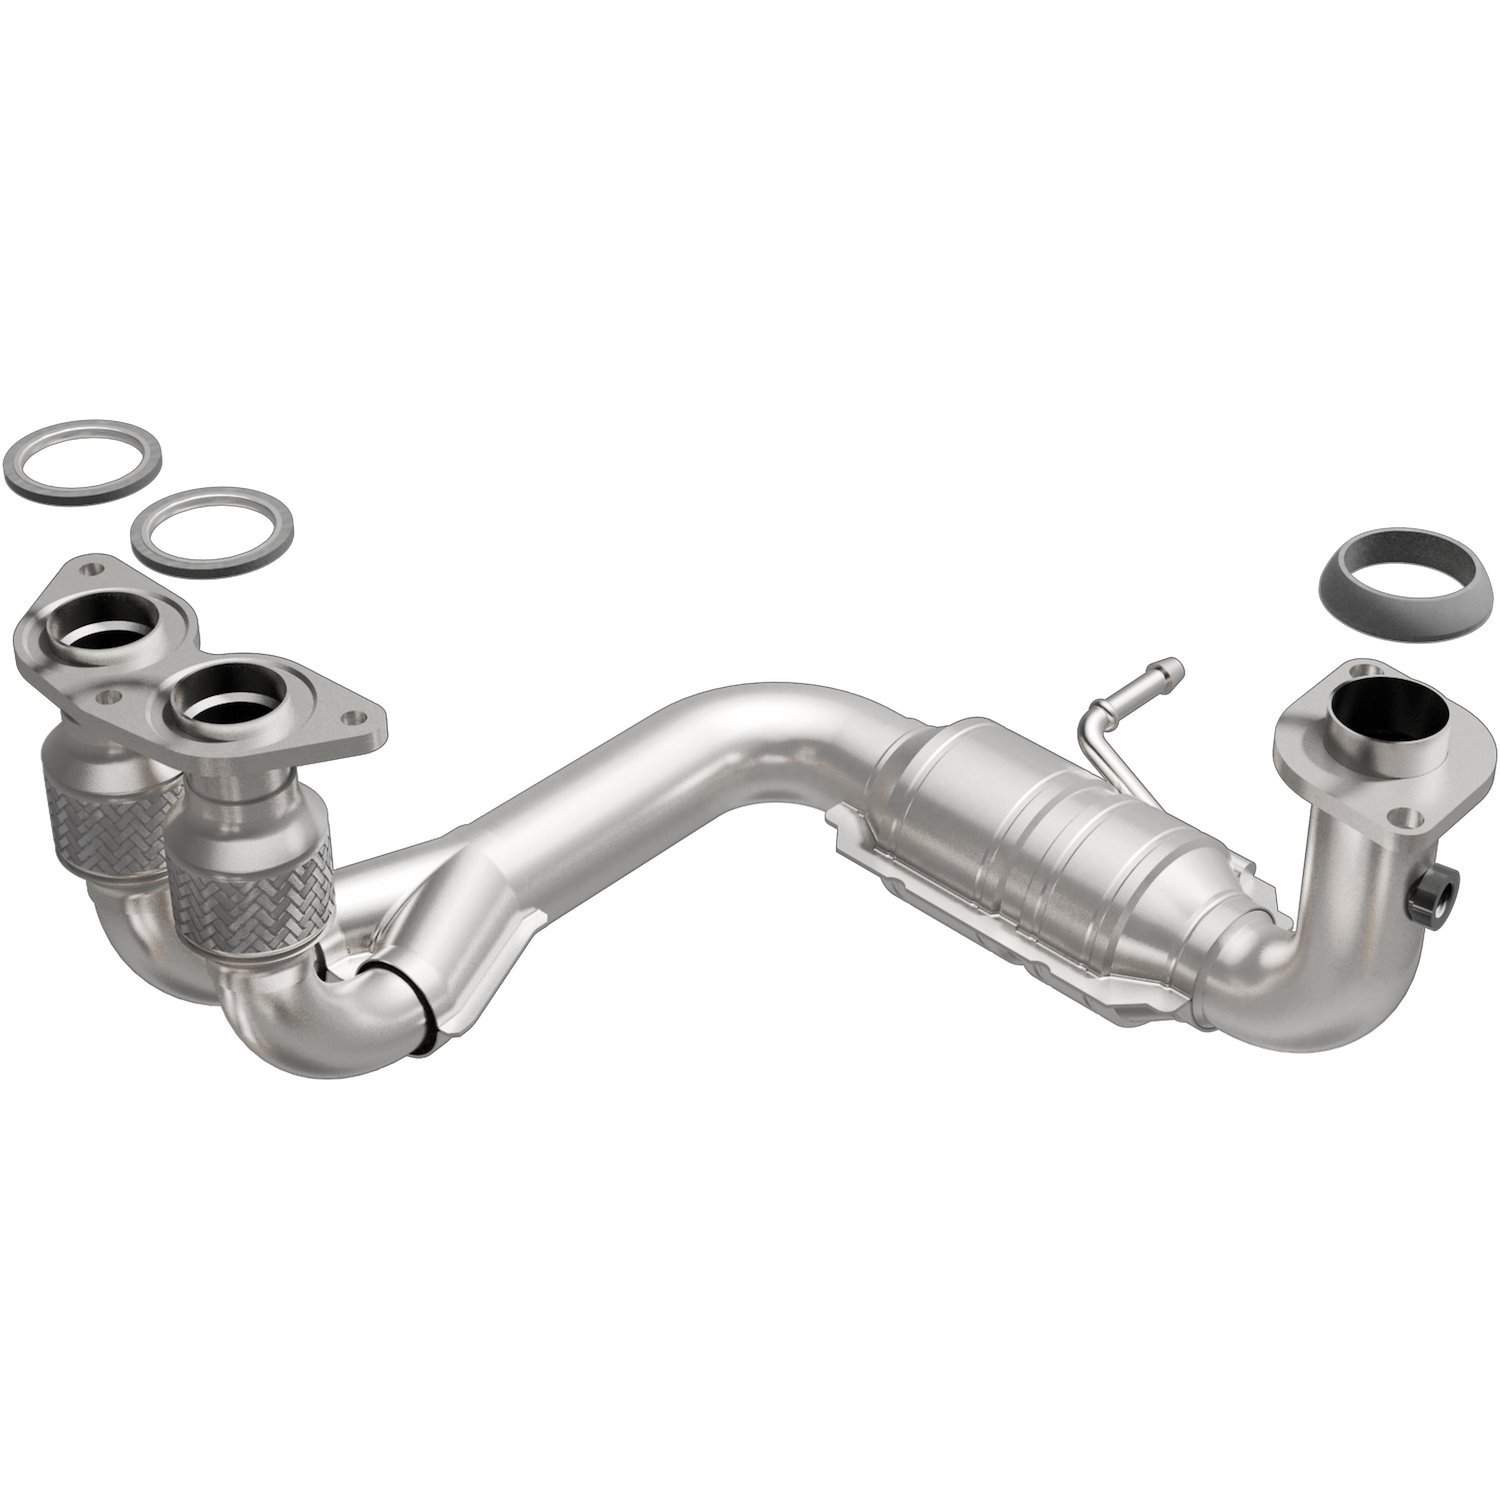 2000-2005 Toyota MR2 Spyder California Grade CARB Compliant Direct-Fit Catalytic Converter